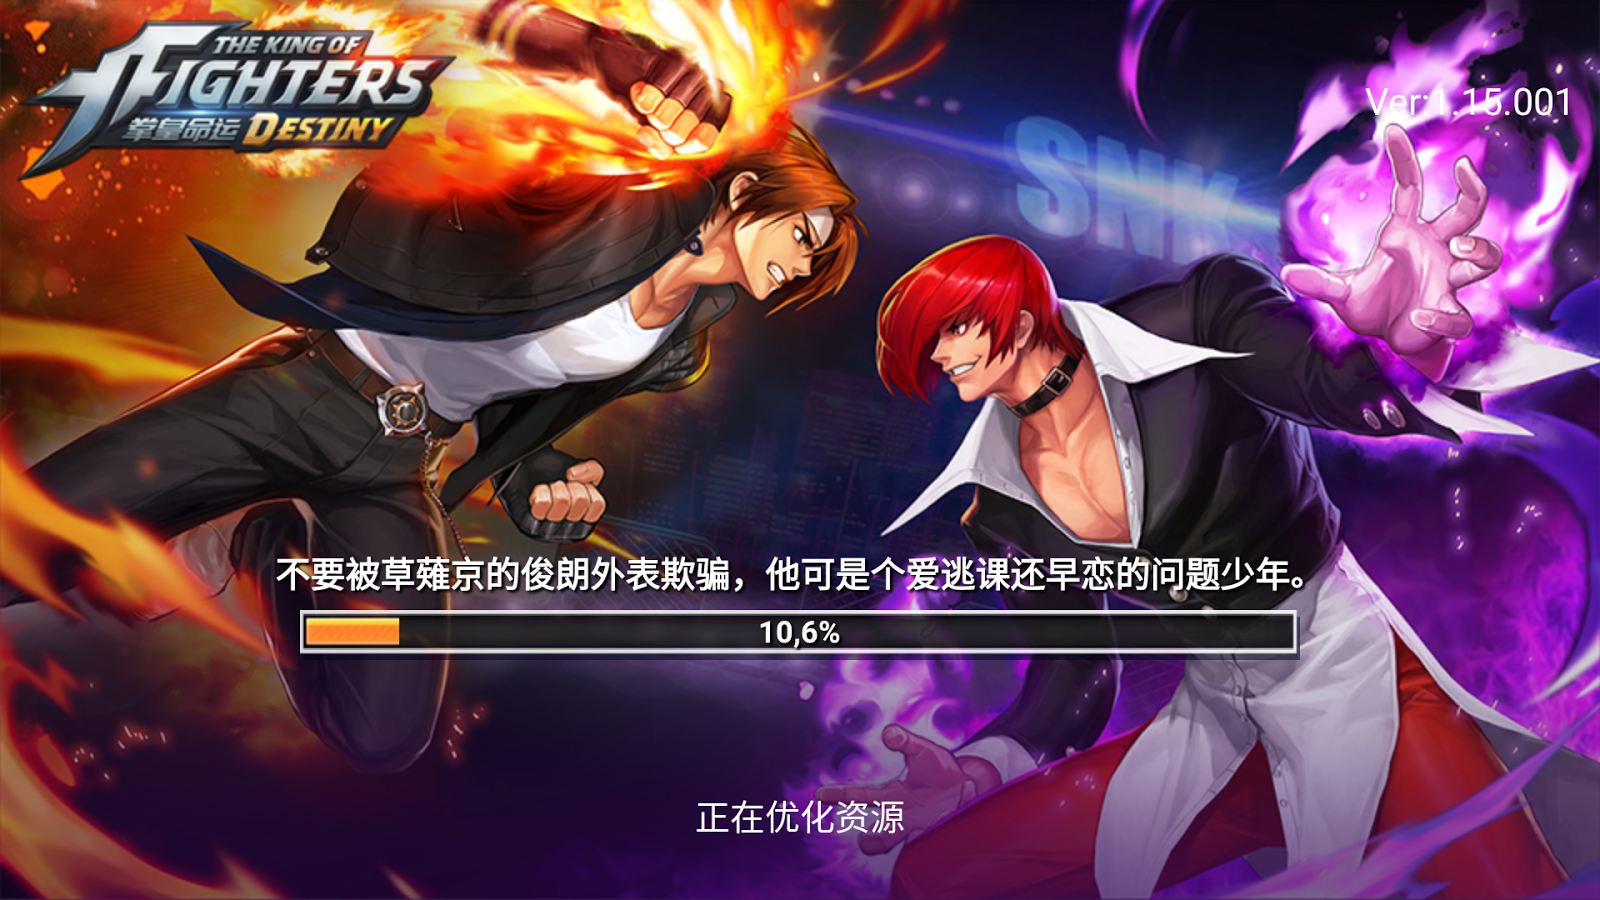 Download The King Of Fighters